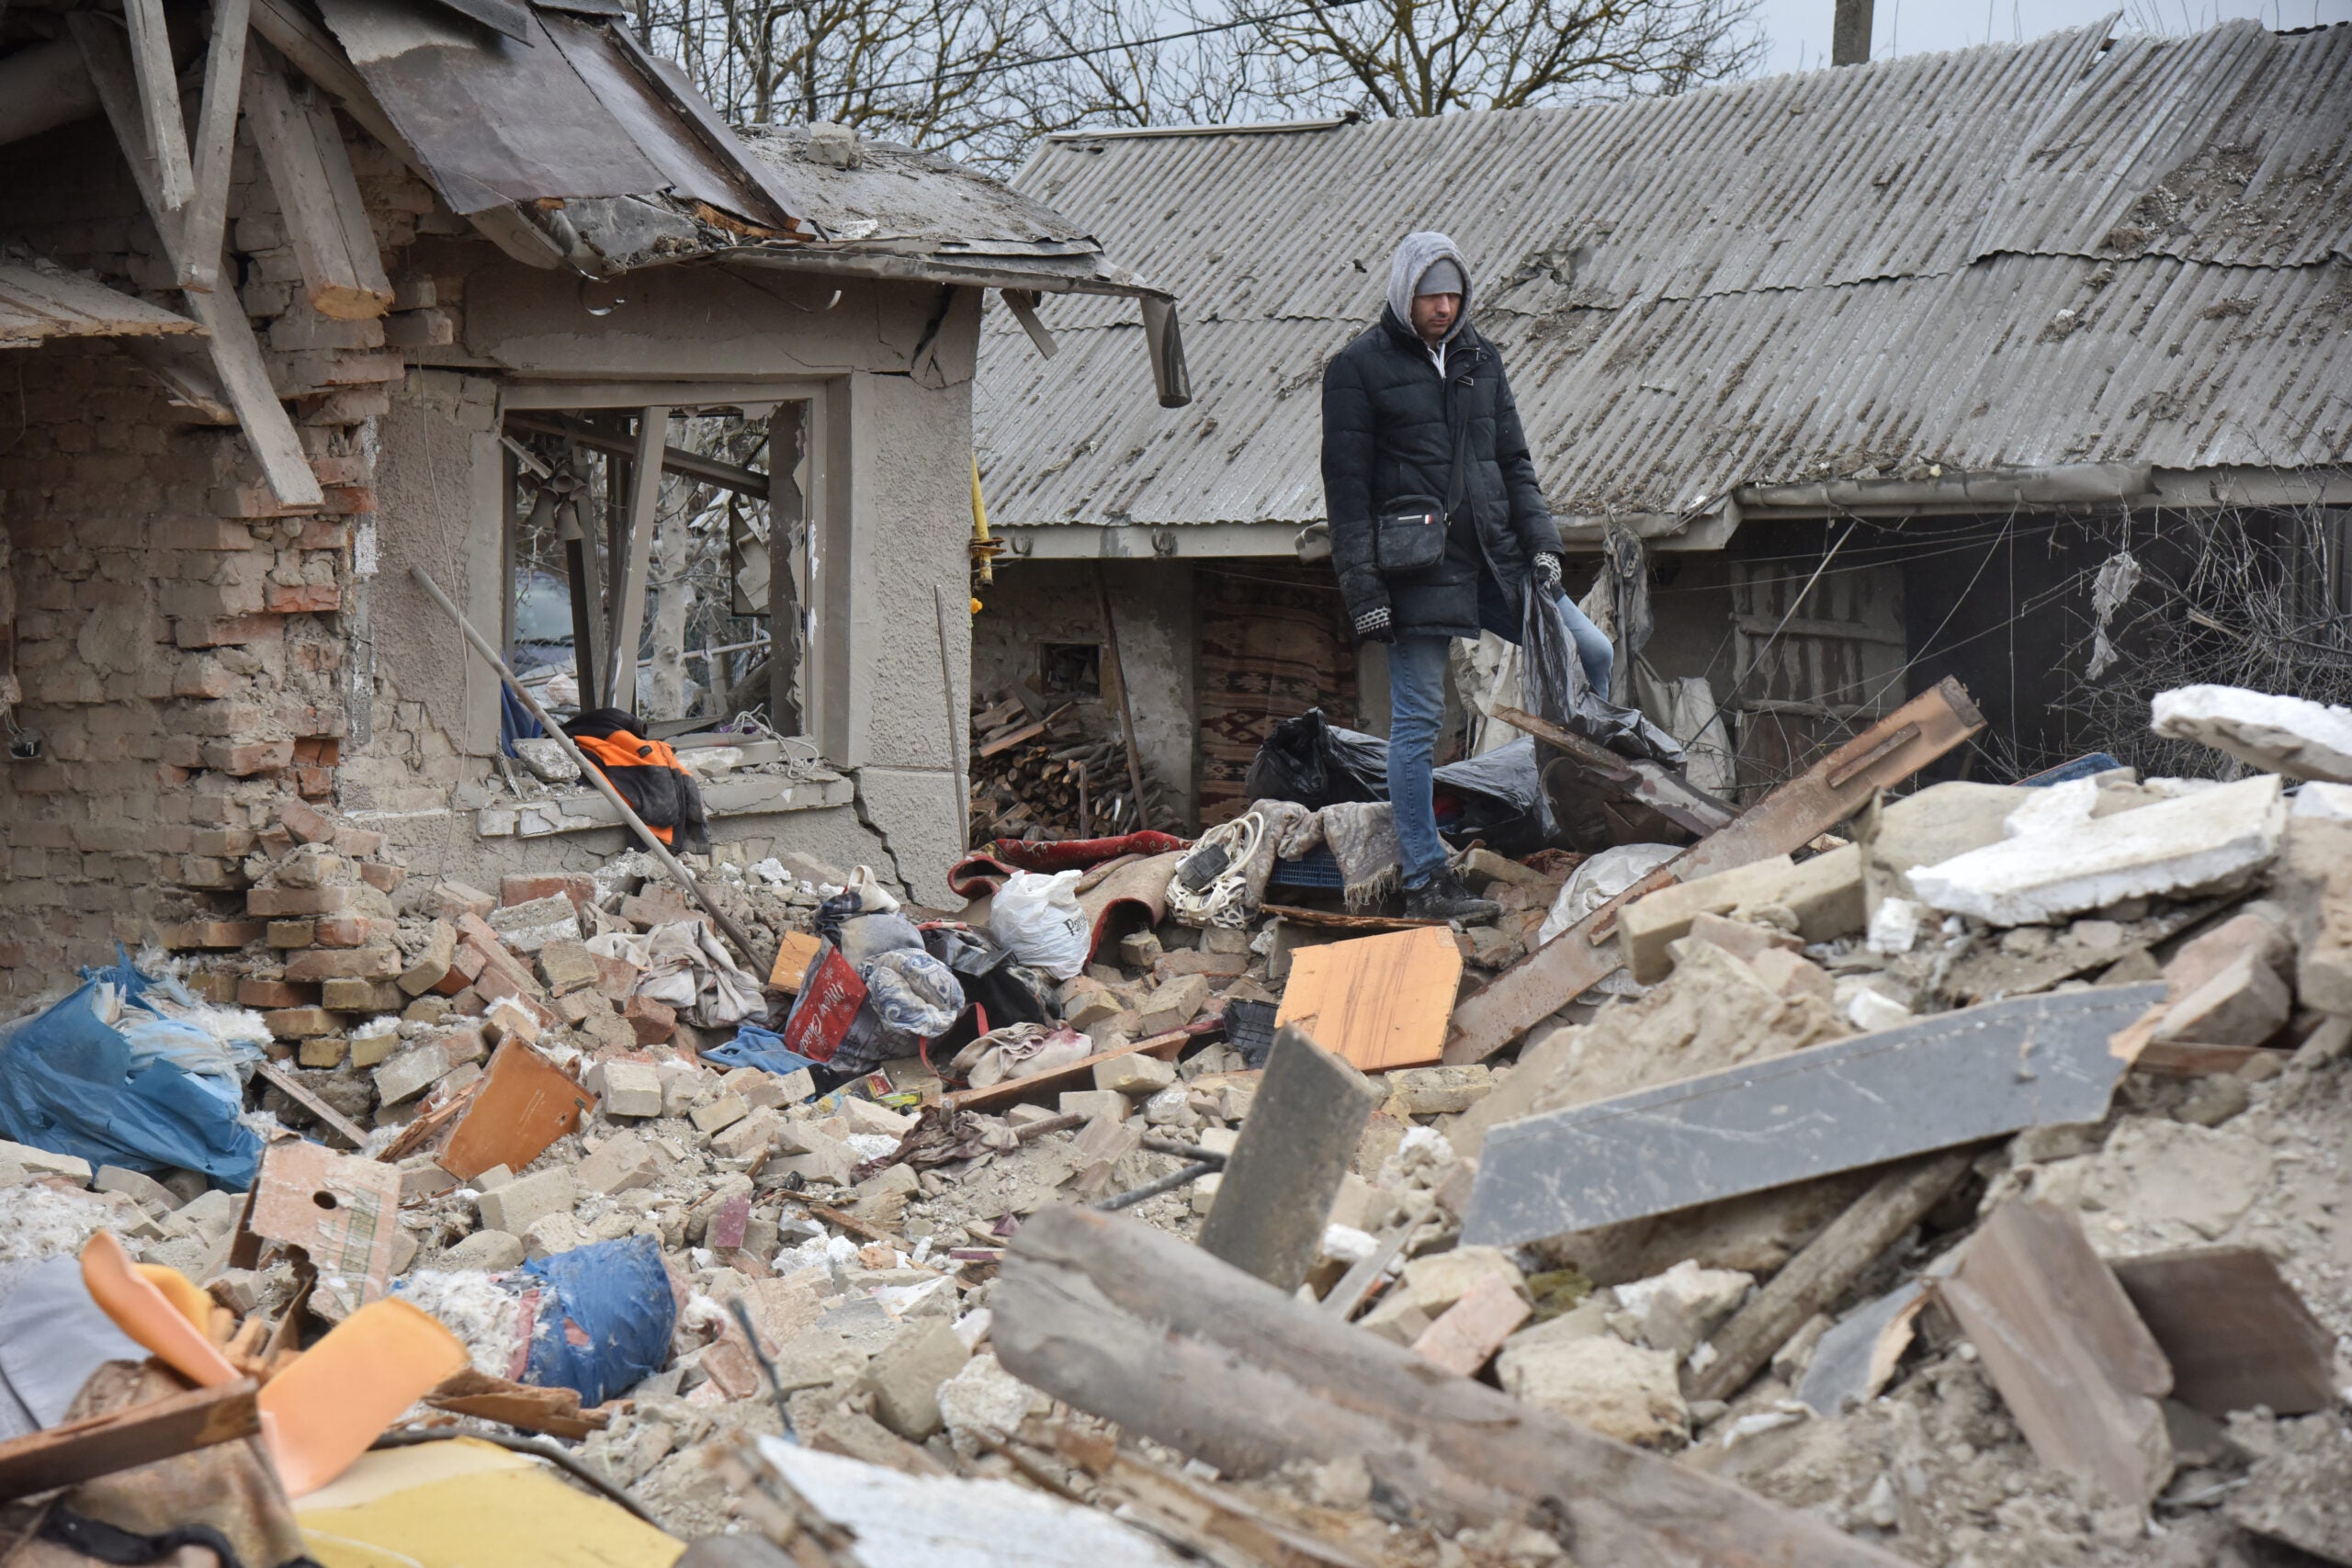 LVIV, UKRAINE - MARCH 9: People disassemble houses destroyed by a Russian missile hitting a residential area in the village of Velika Vilshanytsia, Lviv Region, Ukraine on March 9, 2023. Tonight, a Russian missile hit two residential buildings, killing 5 adults. Nearby buildings and cars were also destroyed. (Photo by Pavlo Palamarchuk/Anadolu Agency via Getty Images)